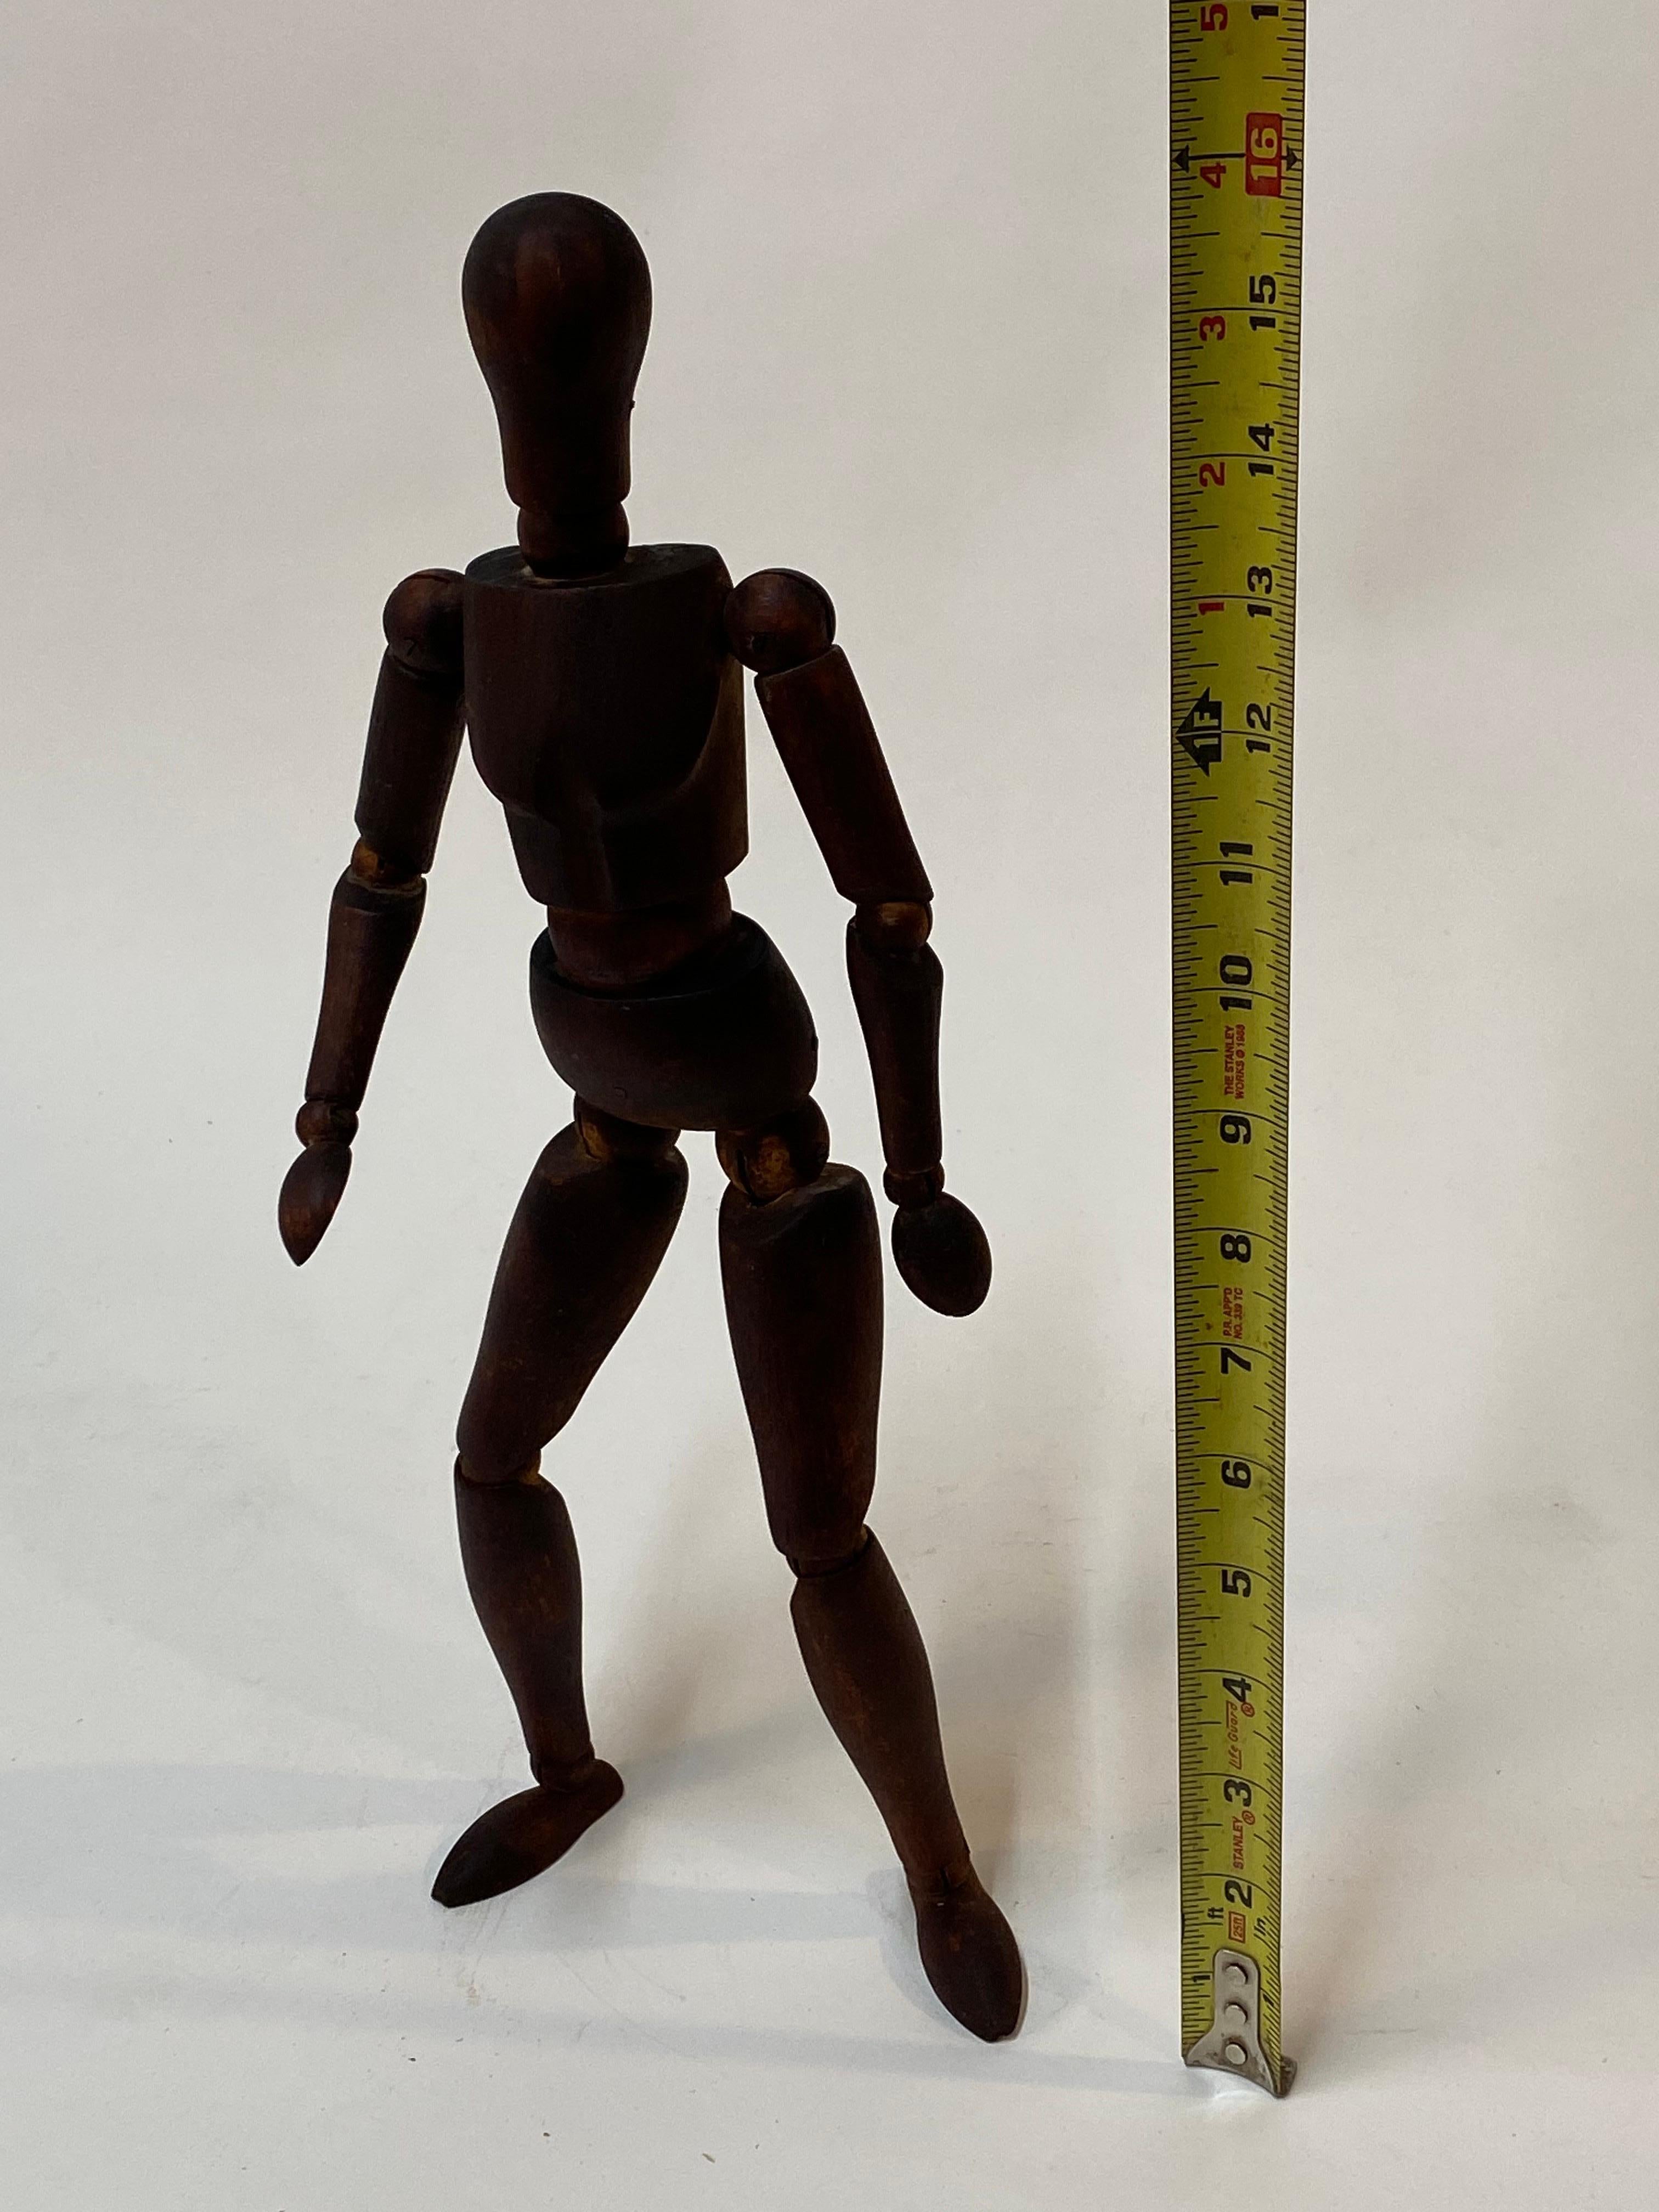 A wonderful vintage articulated wood artist's mannequin. A must have for the artist or objet d'art. The interior coils and bands that position the model are in good condition. The quality of this particular wood model is possibly French in origin.